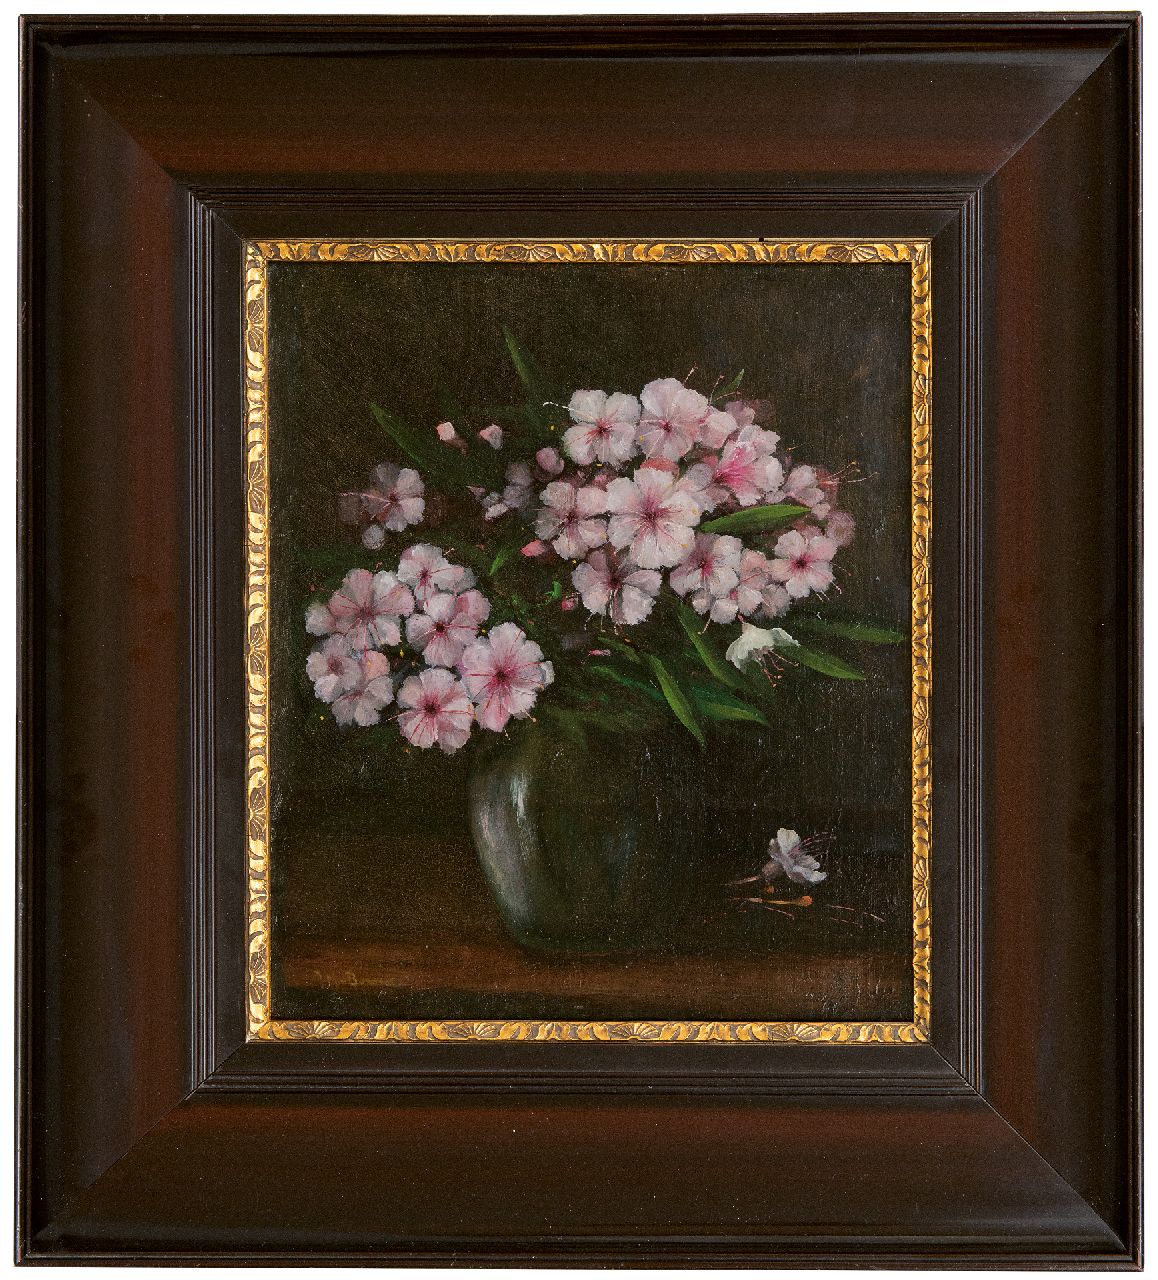 Bommel J.M. van | Jacobus Marinus van Bommel | Paintings offered for sale | Rhododendron in a vase, oil on canvas 38.2 x 33.3 cm, signed l.l. and dated on the stretcher 1932